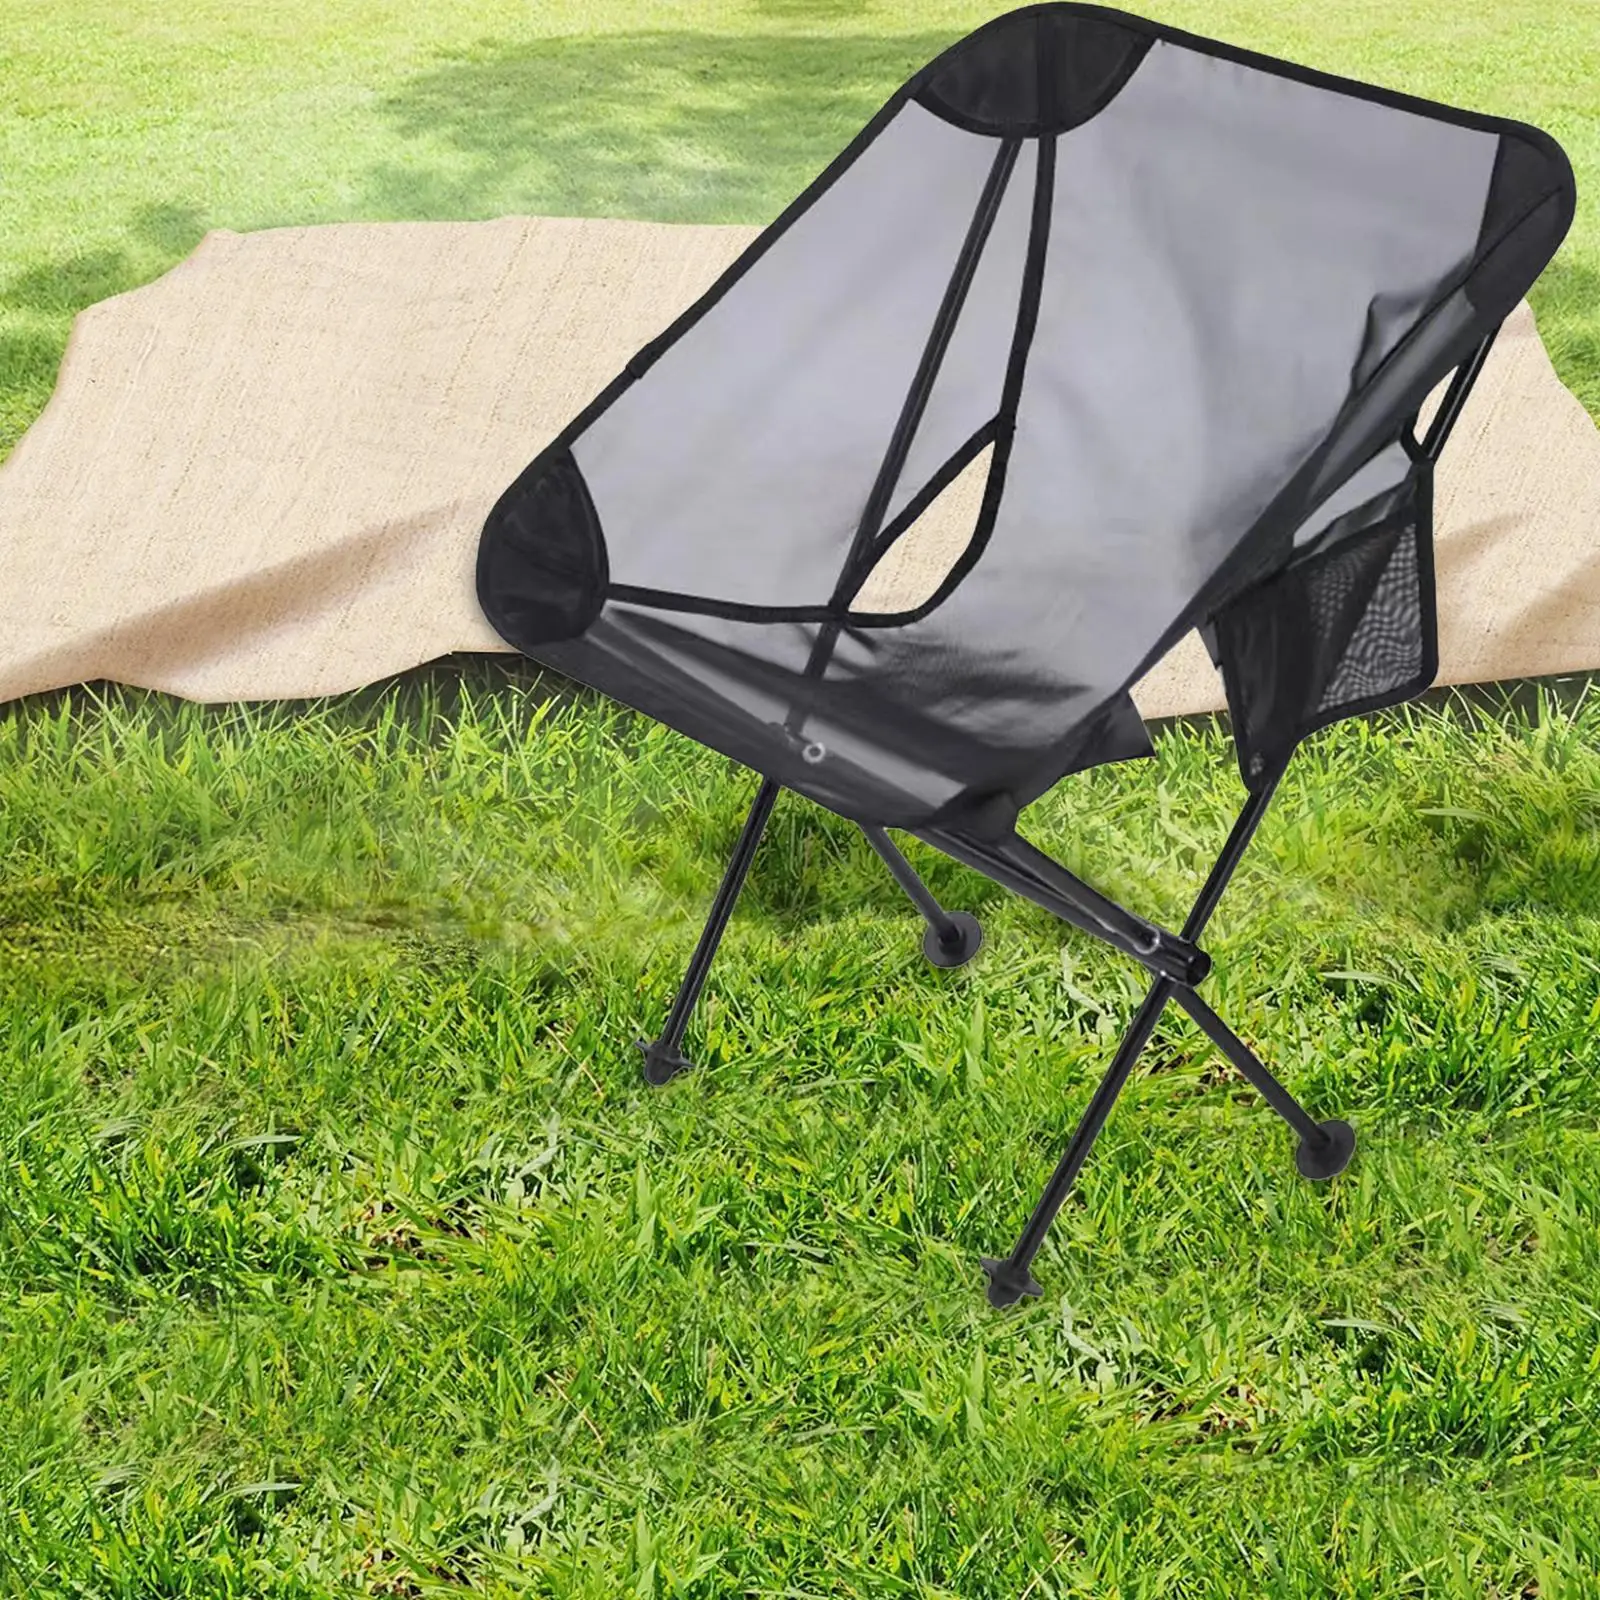 Folding Camping Chair Camping Picnic Chair for Outdoor Picnics Backyard Travels Hiking Park Folding Chair Outdoor Moon Chair